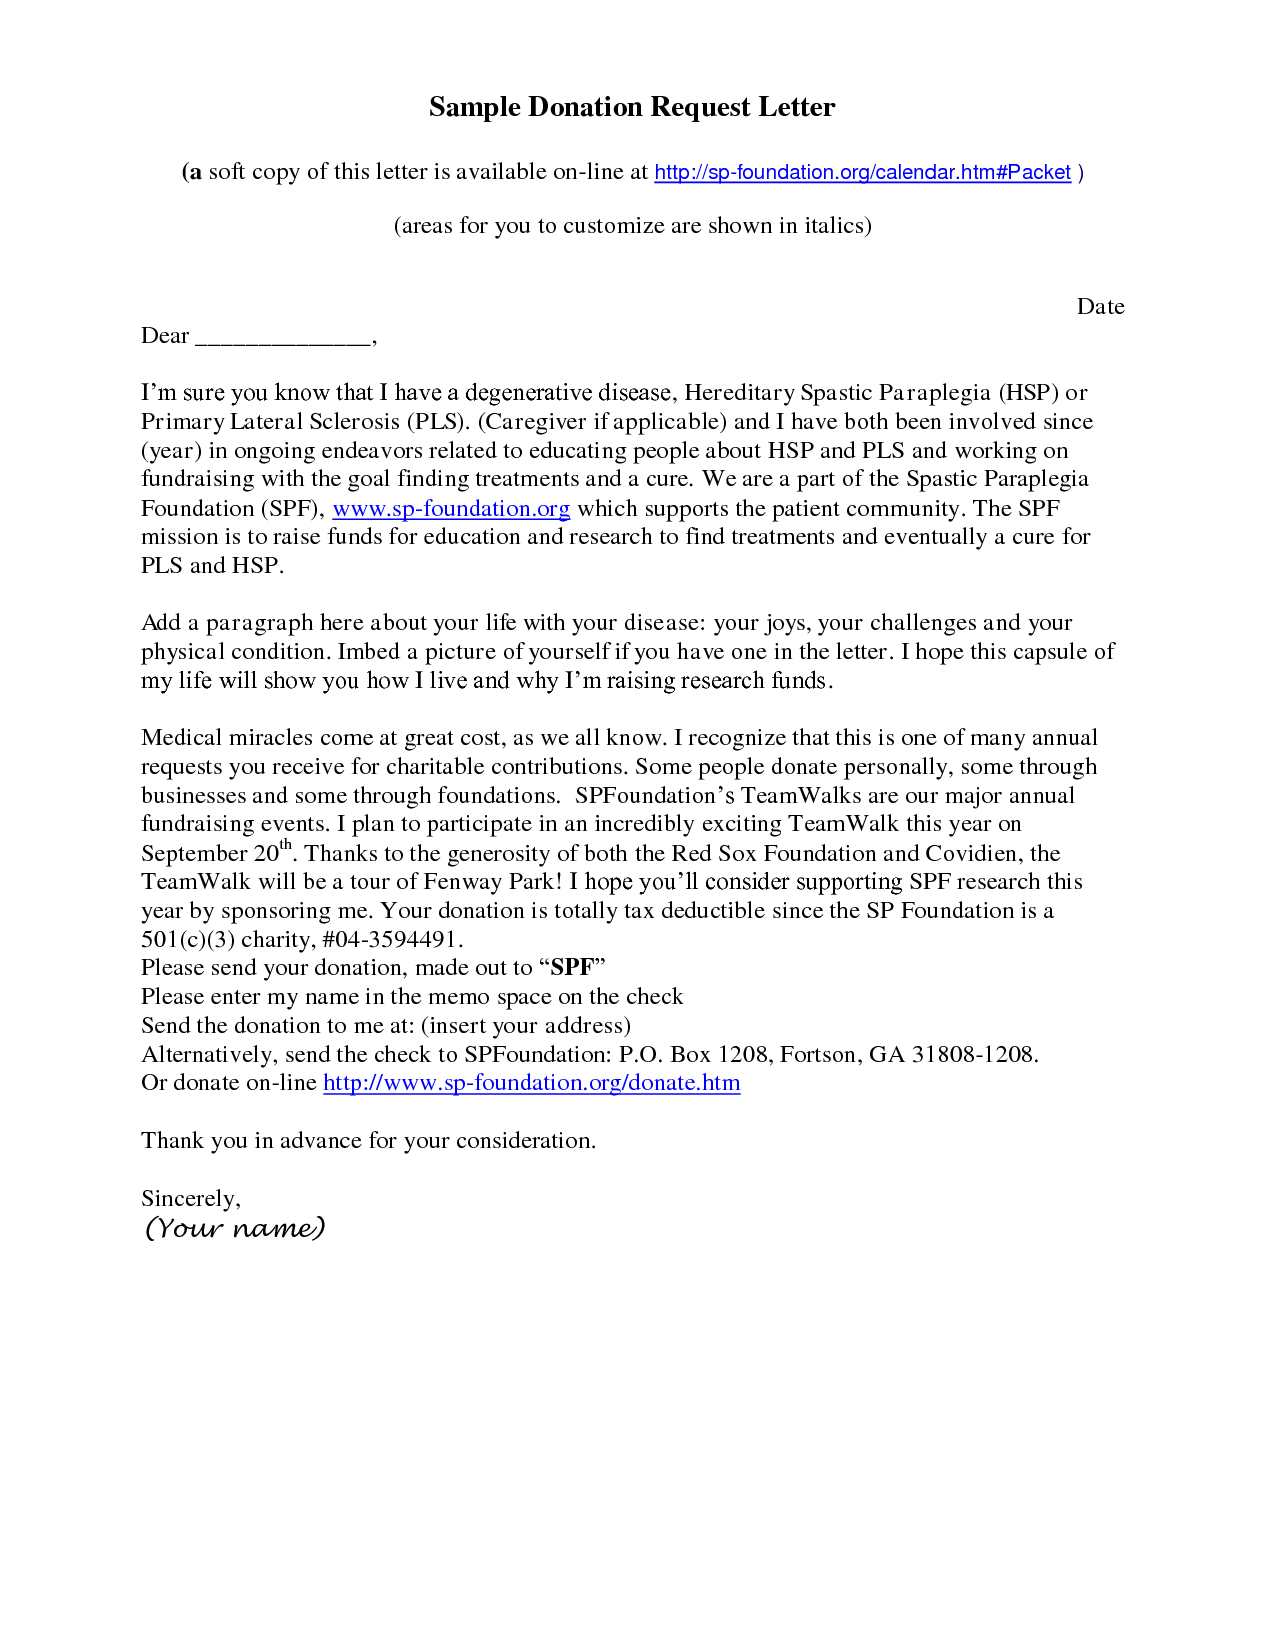 Charity Letter Template asking for Donations - How to Write A solicitation Letter for Donations Choice Image